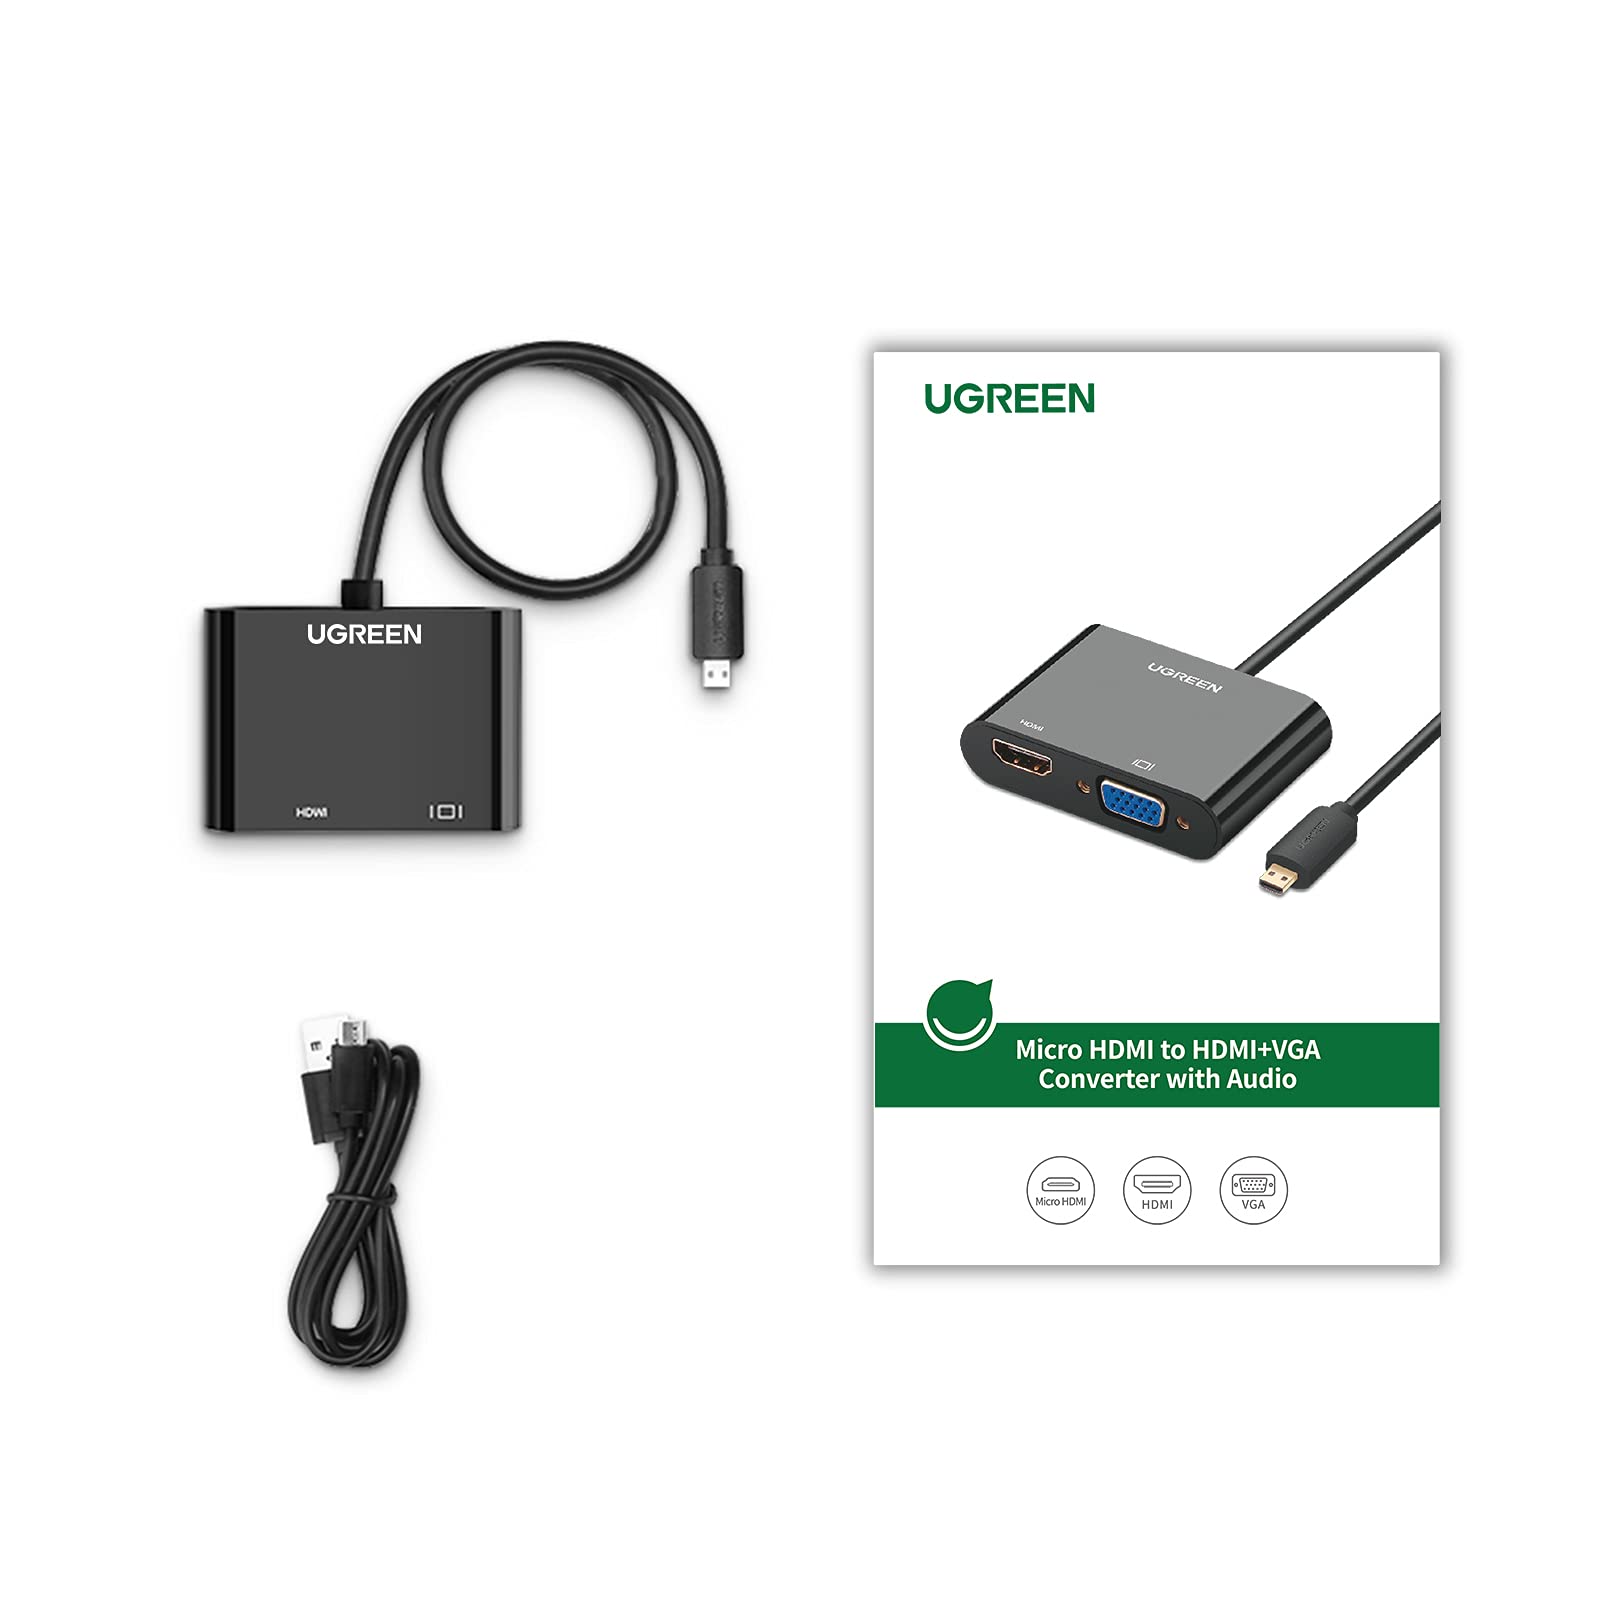 UGREEN Active Micro HDMI to HDMI Converter, Micro HDMI to VGA Adapter, with 3.5mm Audio Jack and Micro USB Power Port for Hero 7, 6, Ultrabooks, Lenovo Yoga 3, Asus ZenBook UX30, Cameras, Black